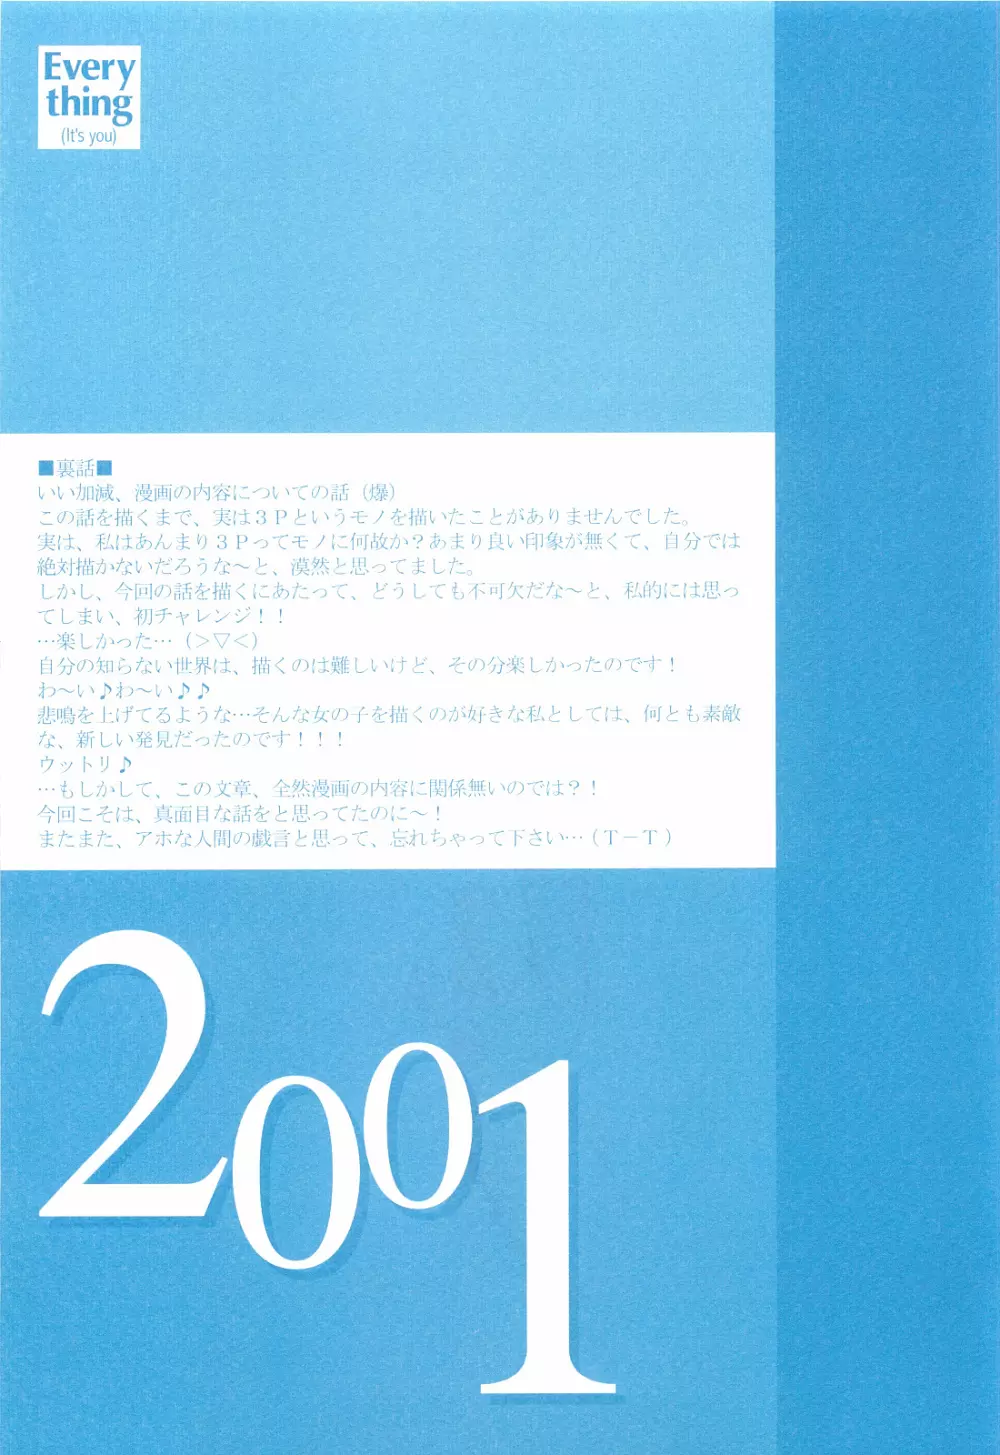 (C62) [INFORMATION HIGH (有のすけ)] Everything(It's you) 総集編 1999－2001 (痕) Page.106